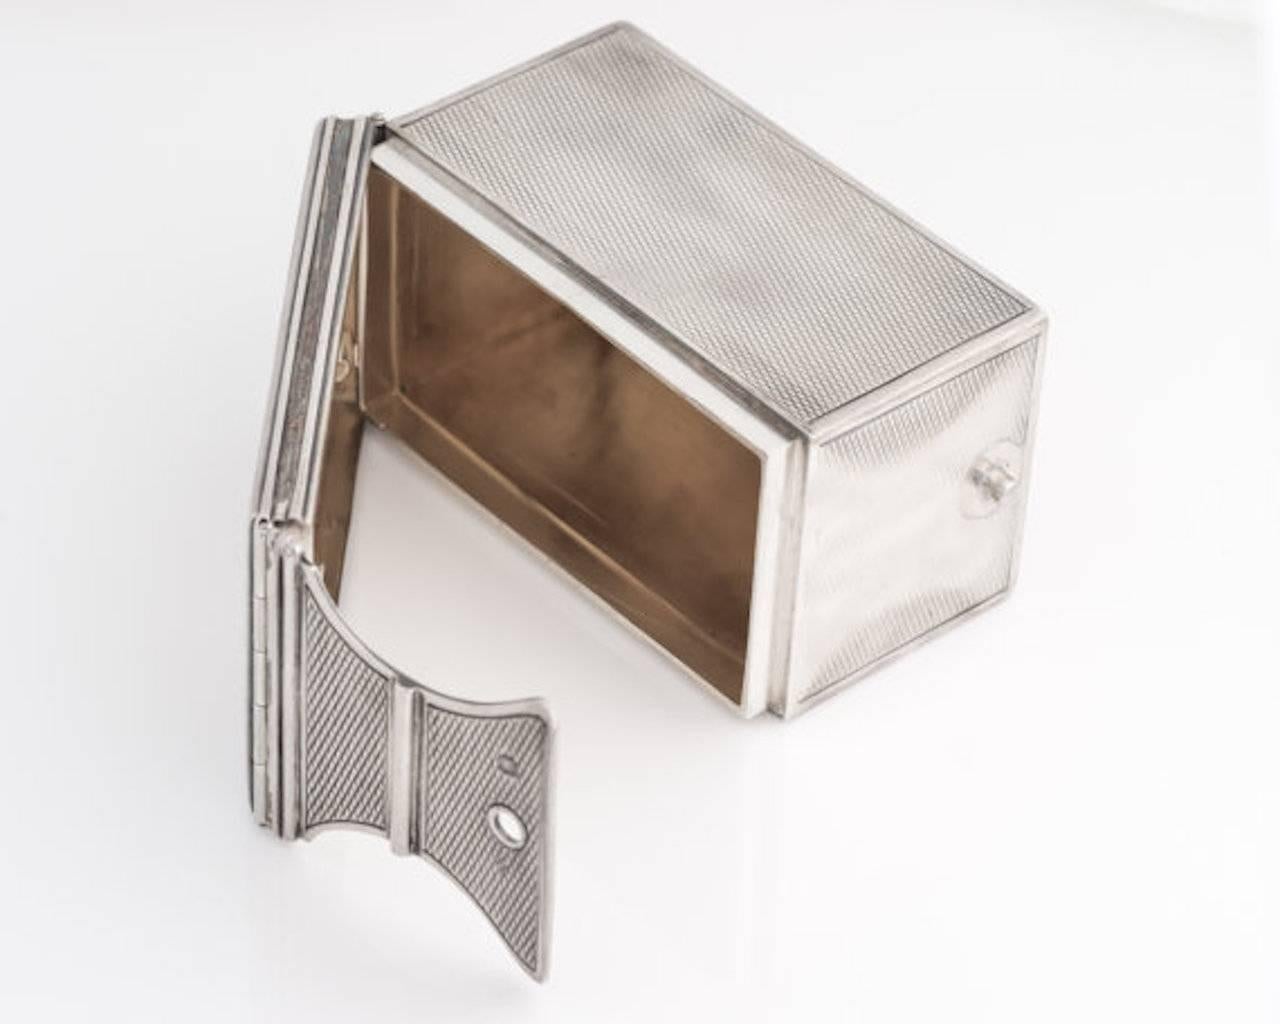 Authentic G. Keller Paris silver! This famous silversmith made silverware and accessories in Paris in the 1920s. He handmade this intricate box with a cursive monogram on the top of the box. 

The silver has a diamond pattern on the surface of each